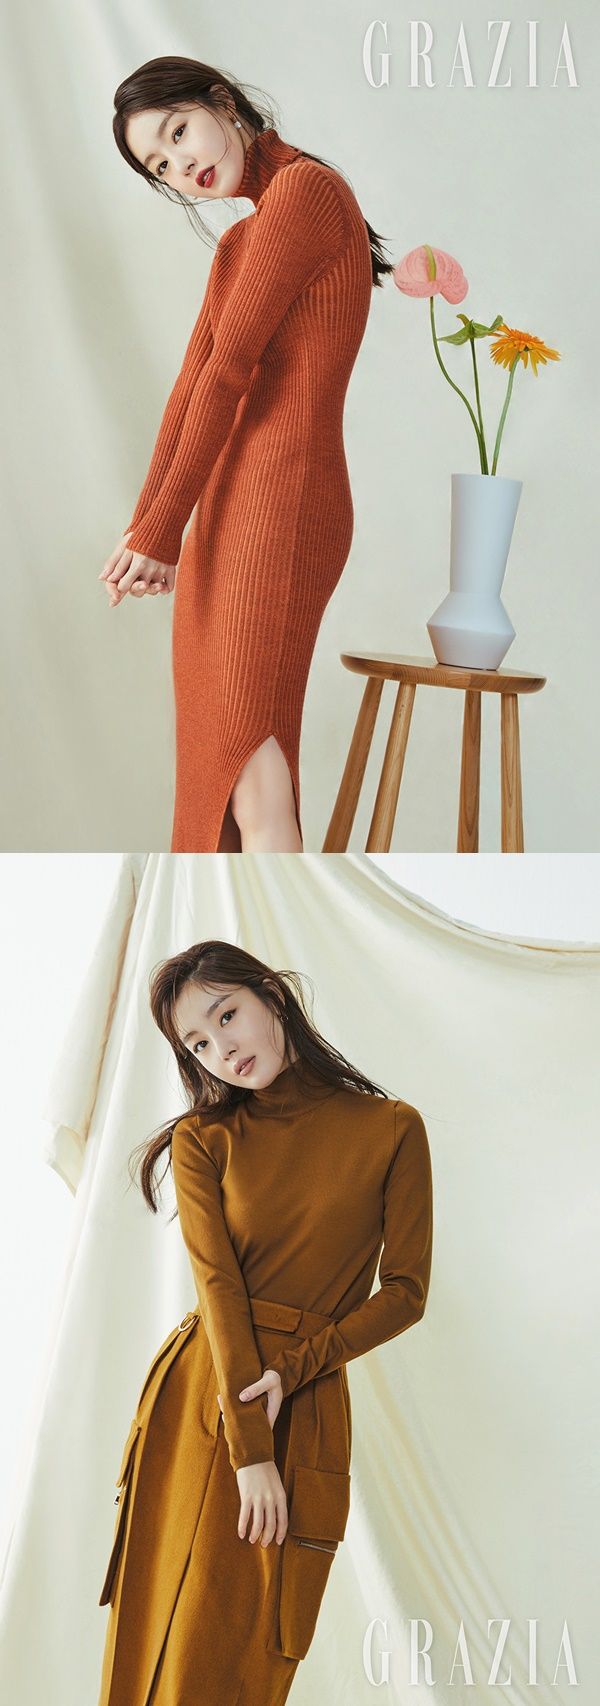 Actor Han Sun-hwa mentioned his brother, X1 Han Seung-woo.Actor Han Sun-hwa, who performed an impressive performance as Gomadam in Save Me 2, decorated a picture of a fashion magazine on the 18th.This picture, which emphasizes the subtle toffe color and brown color makeup, features the soft and fascinating beauty of Han Sun-hwa.It has been reborn as an atmosphere of autumn goddess, perfecting the beauty look of various brown color points with eyes and lips.In an interview with Fashion magazine, I was able to hear his true story growing one step further as an actor.When asked what the changes were as Han Sun-hwa began acting, he said, I was worried because I had more responsibility and homework to deal with myself than when I was a child.There are many things that are cautious and so I become more careful. I feel mature because of such inner changes. Also, about his brother Han Seung-woo, who started his activities with X1, I am so proud.I tried not to tell my brother who just started to think that my sister, my sister, should not be a stumbling block.My brother cheered and encouraged me from behind, he said. The white face and the hard work are similar to each other.Han Sun-hwa has recently confirmed her appearance in an independent feature film and is set to start filming soon.